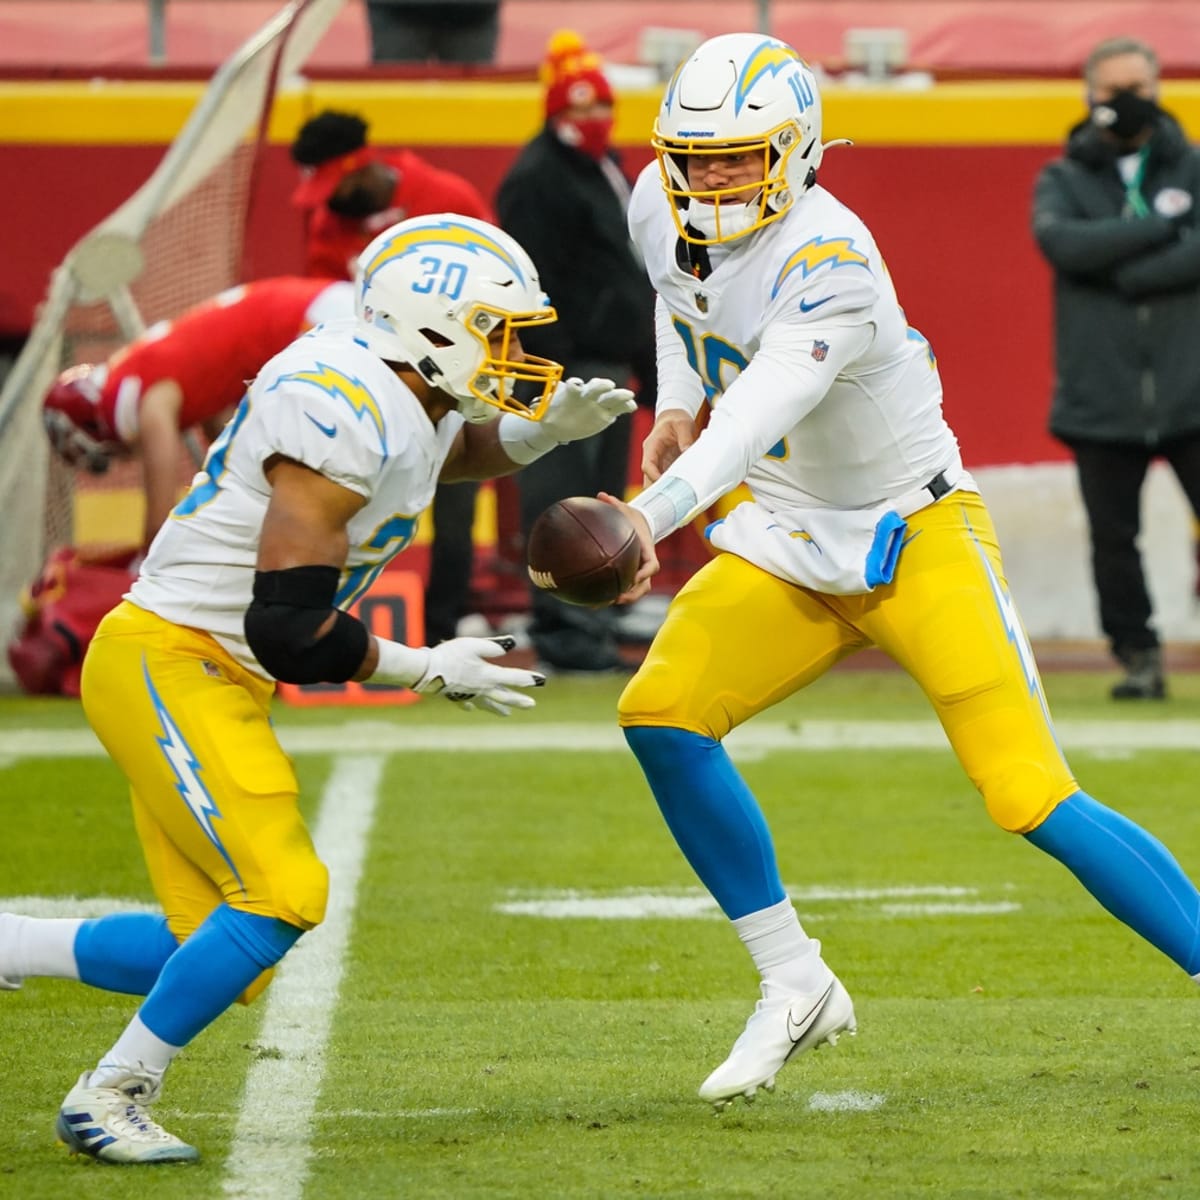 Chargers Fans Present Insane Theory Surrounding Justin Herbert &  Newly-Drafted QB - Sports Illustrated Los Angeles Chargers News, Analysis  and More